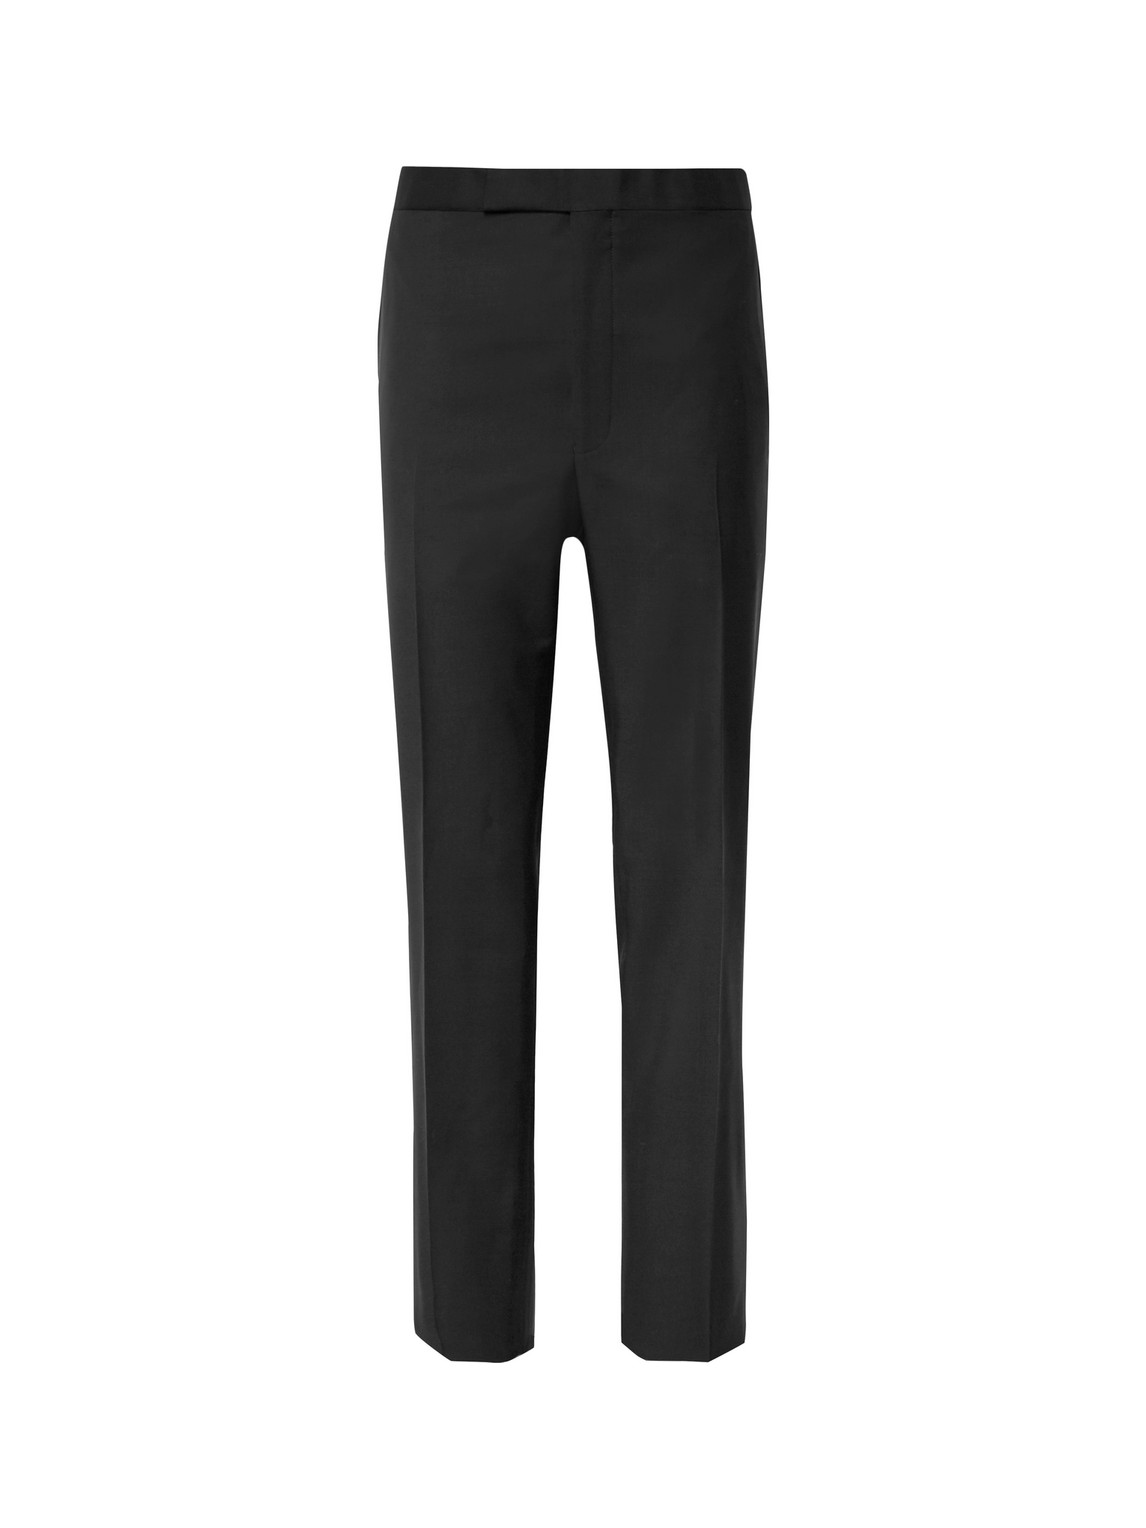 Black Satin-Trimmed Wool and Mohair-Blend Tuxedo Trousers